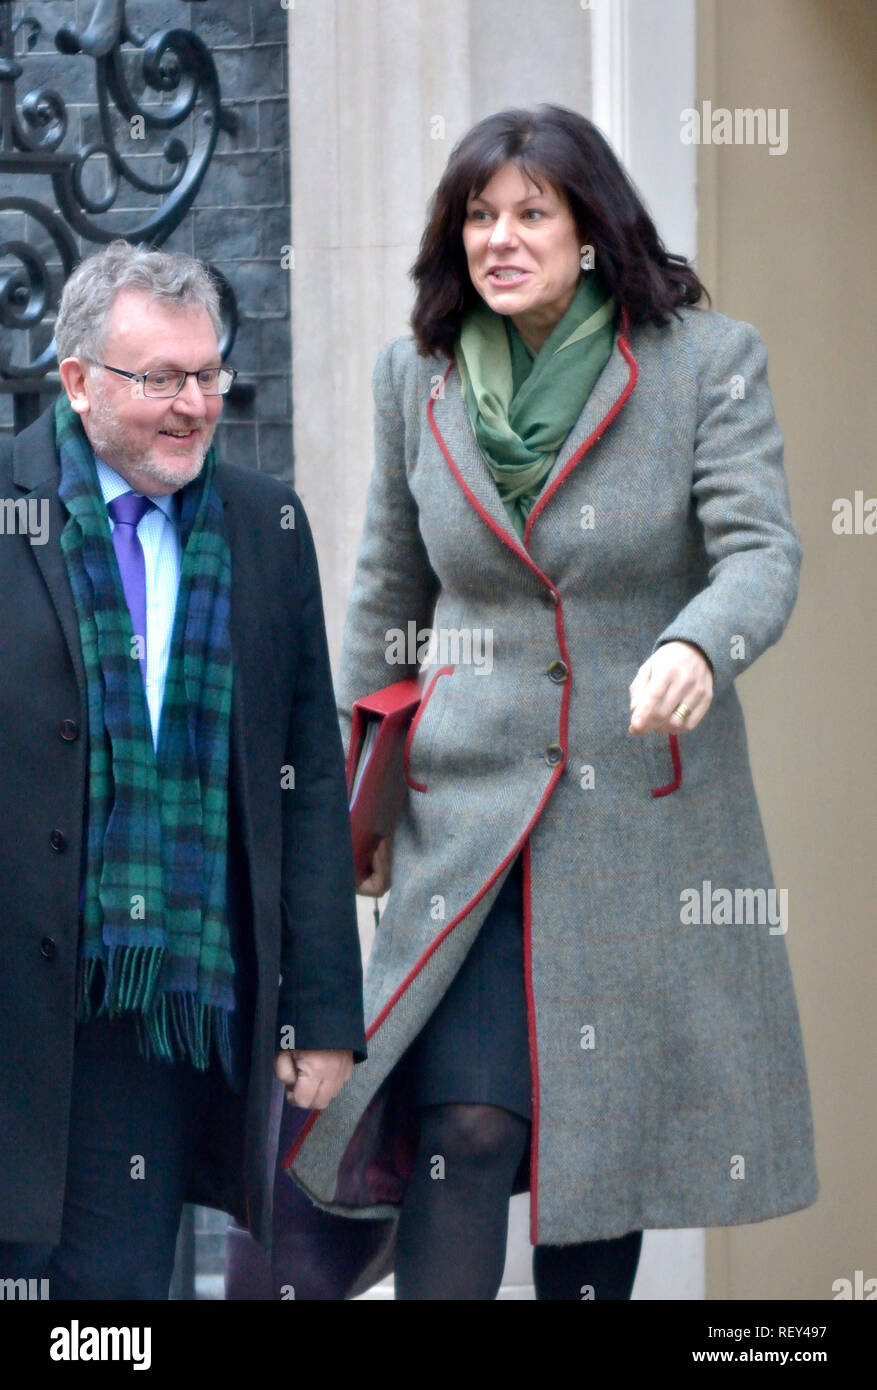 David Mundell MP (Con: Dumfriesshire, Clydesdale and Tweeddale) Secretary of State for Scotland and Claire Perry MP (Con: Devizes) Minister of State f Stock Photo